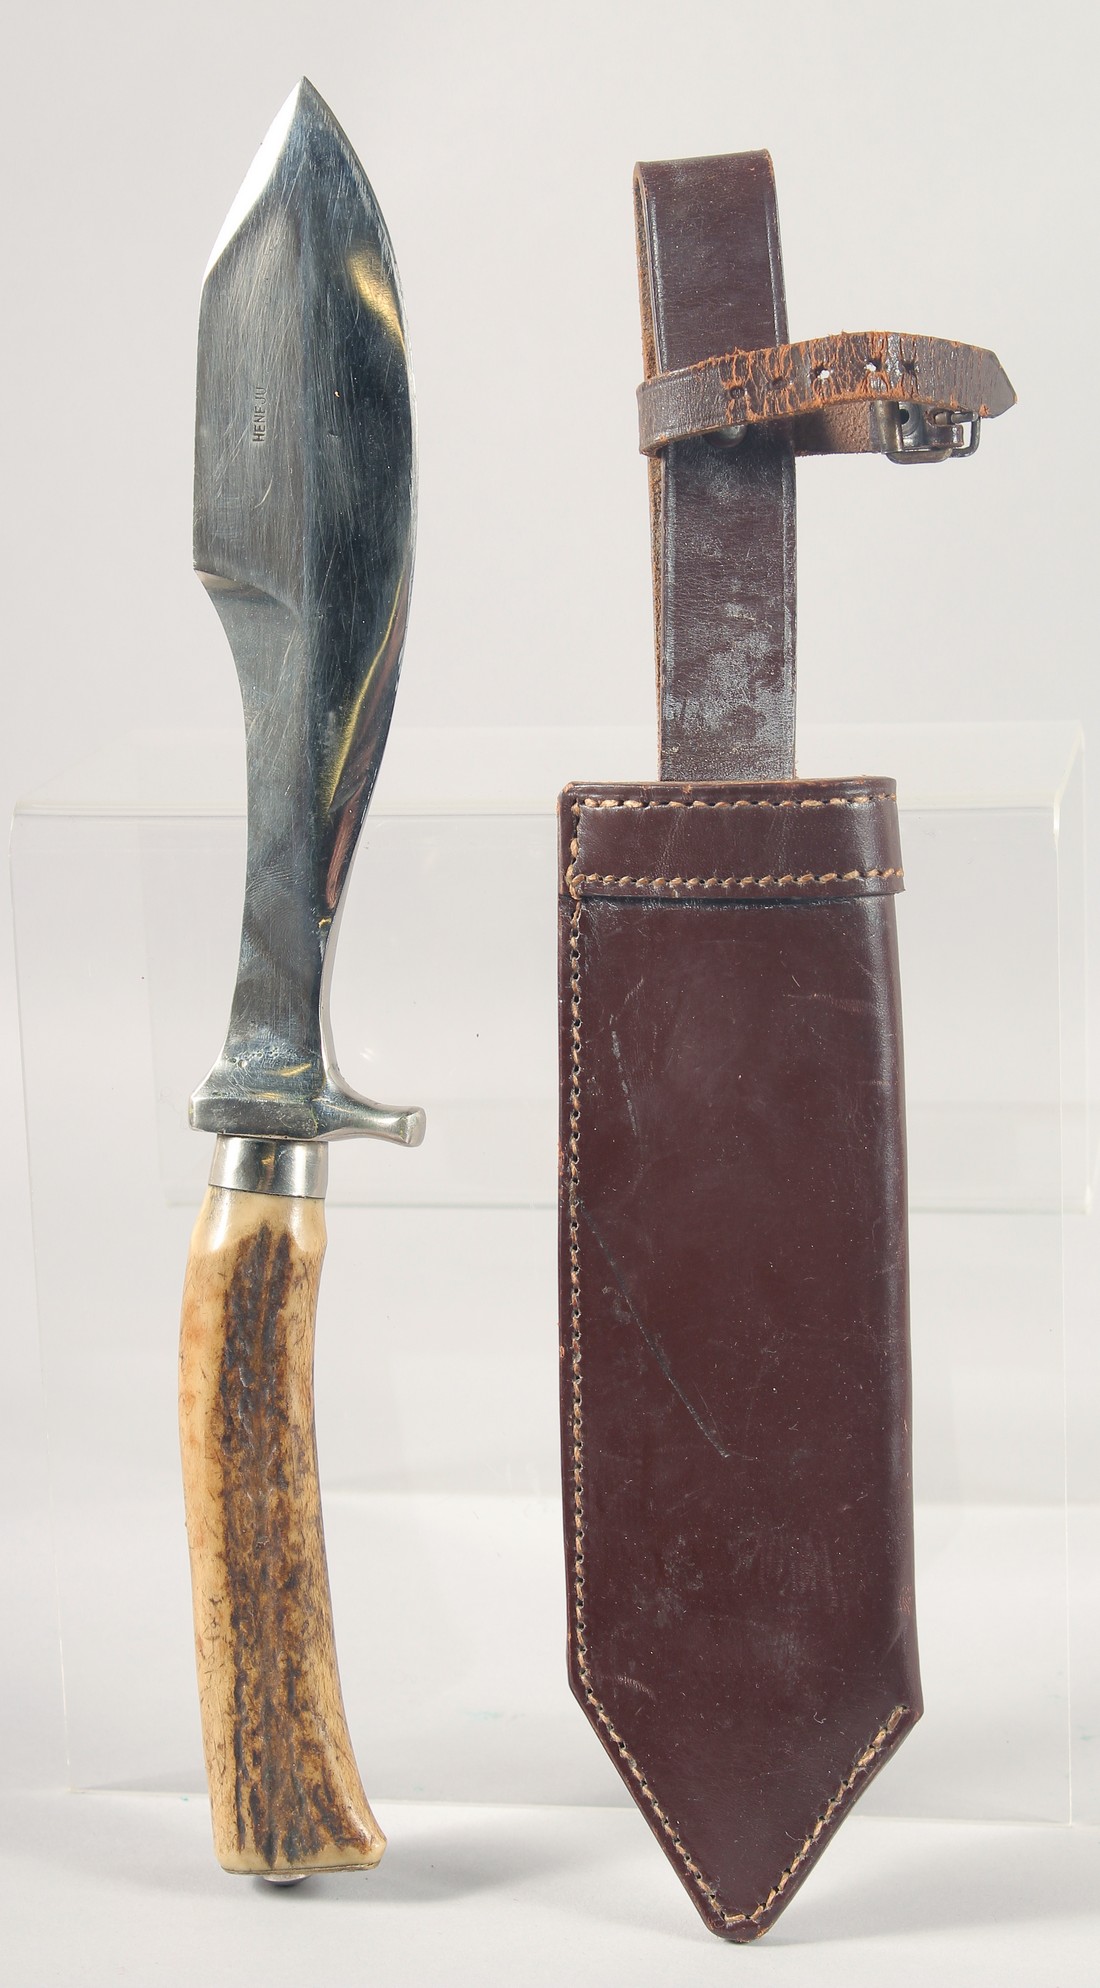 A HENEJU KNIFE, with an antler handle, 13" long, with a leather sheath.